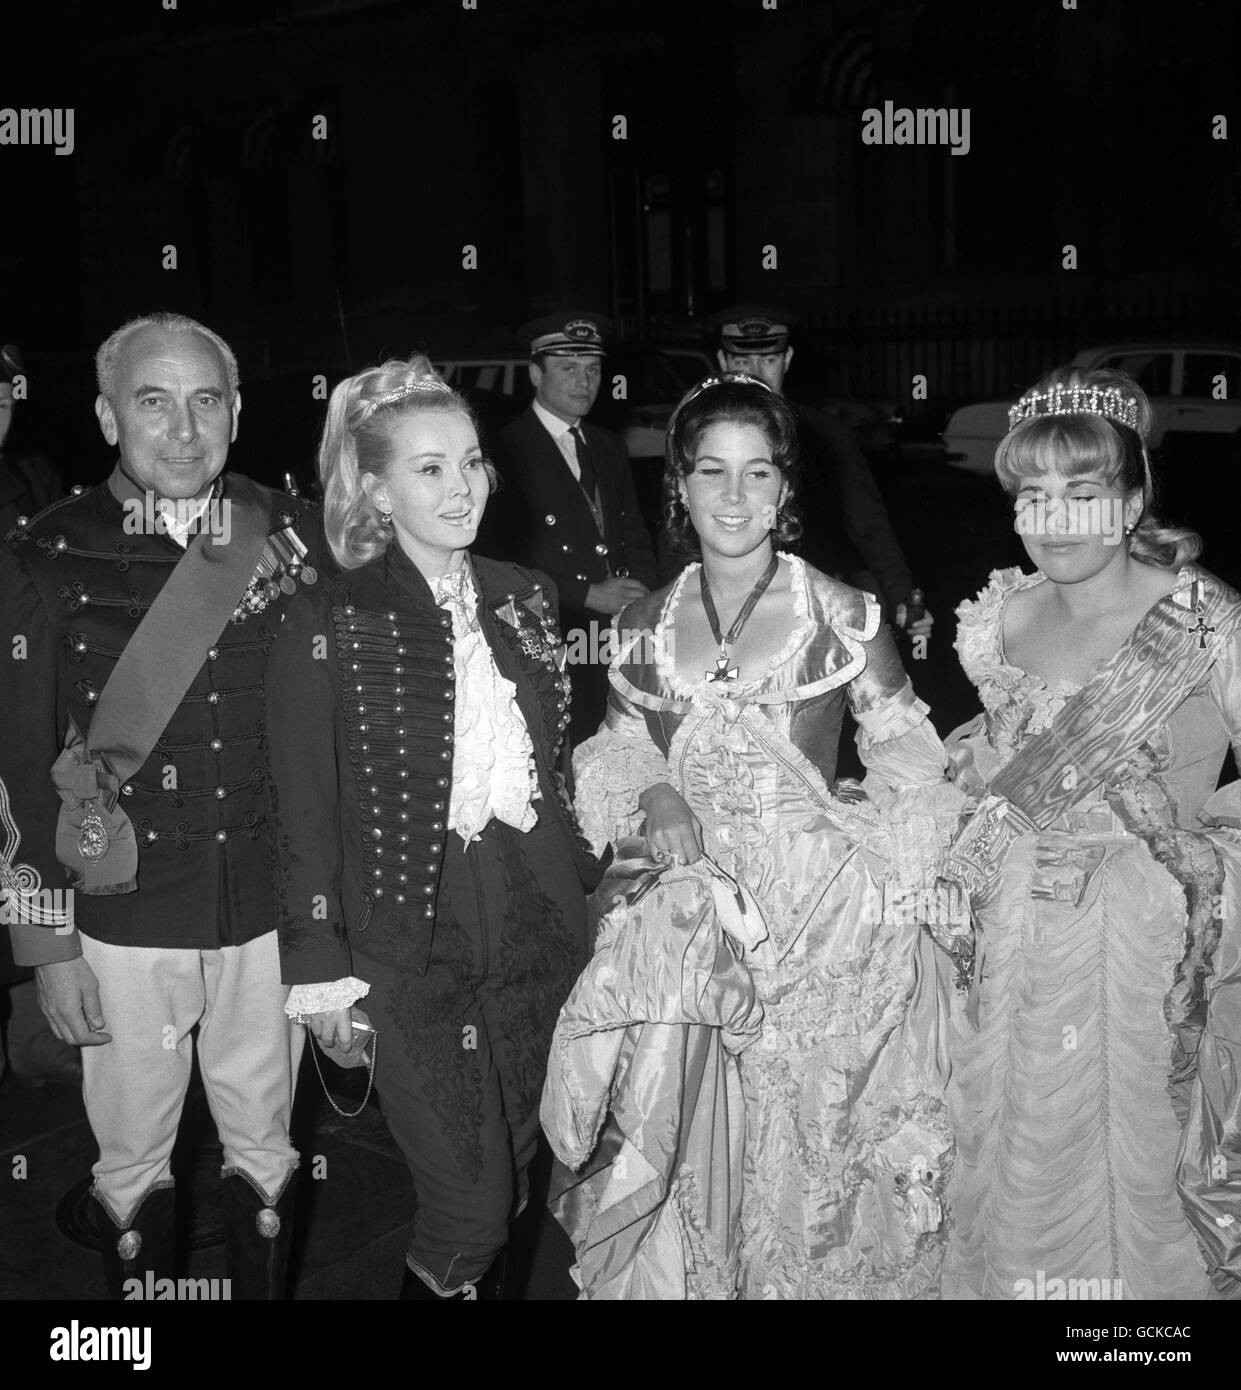 Actress Zsa Zsa Gabor, dressed in the uniform of a Hussar, with her husband, American industrialist Herbert Hutner, and her daughter Francesca Hilton, right. Stock Photo